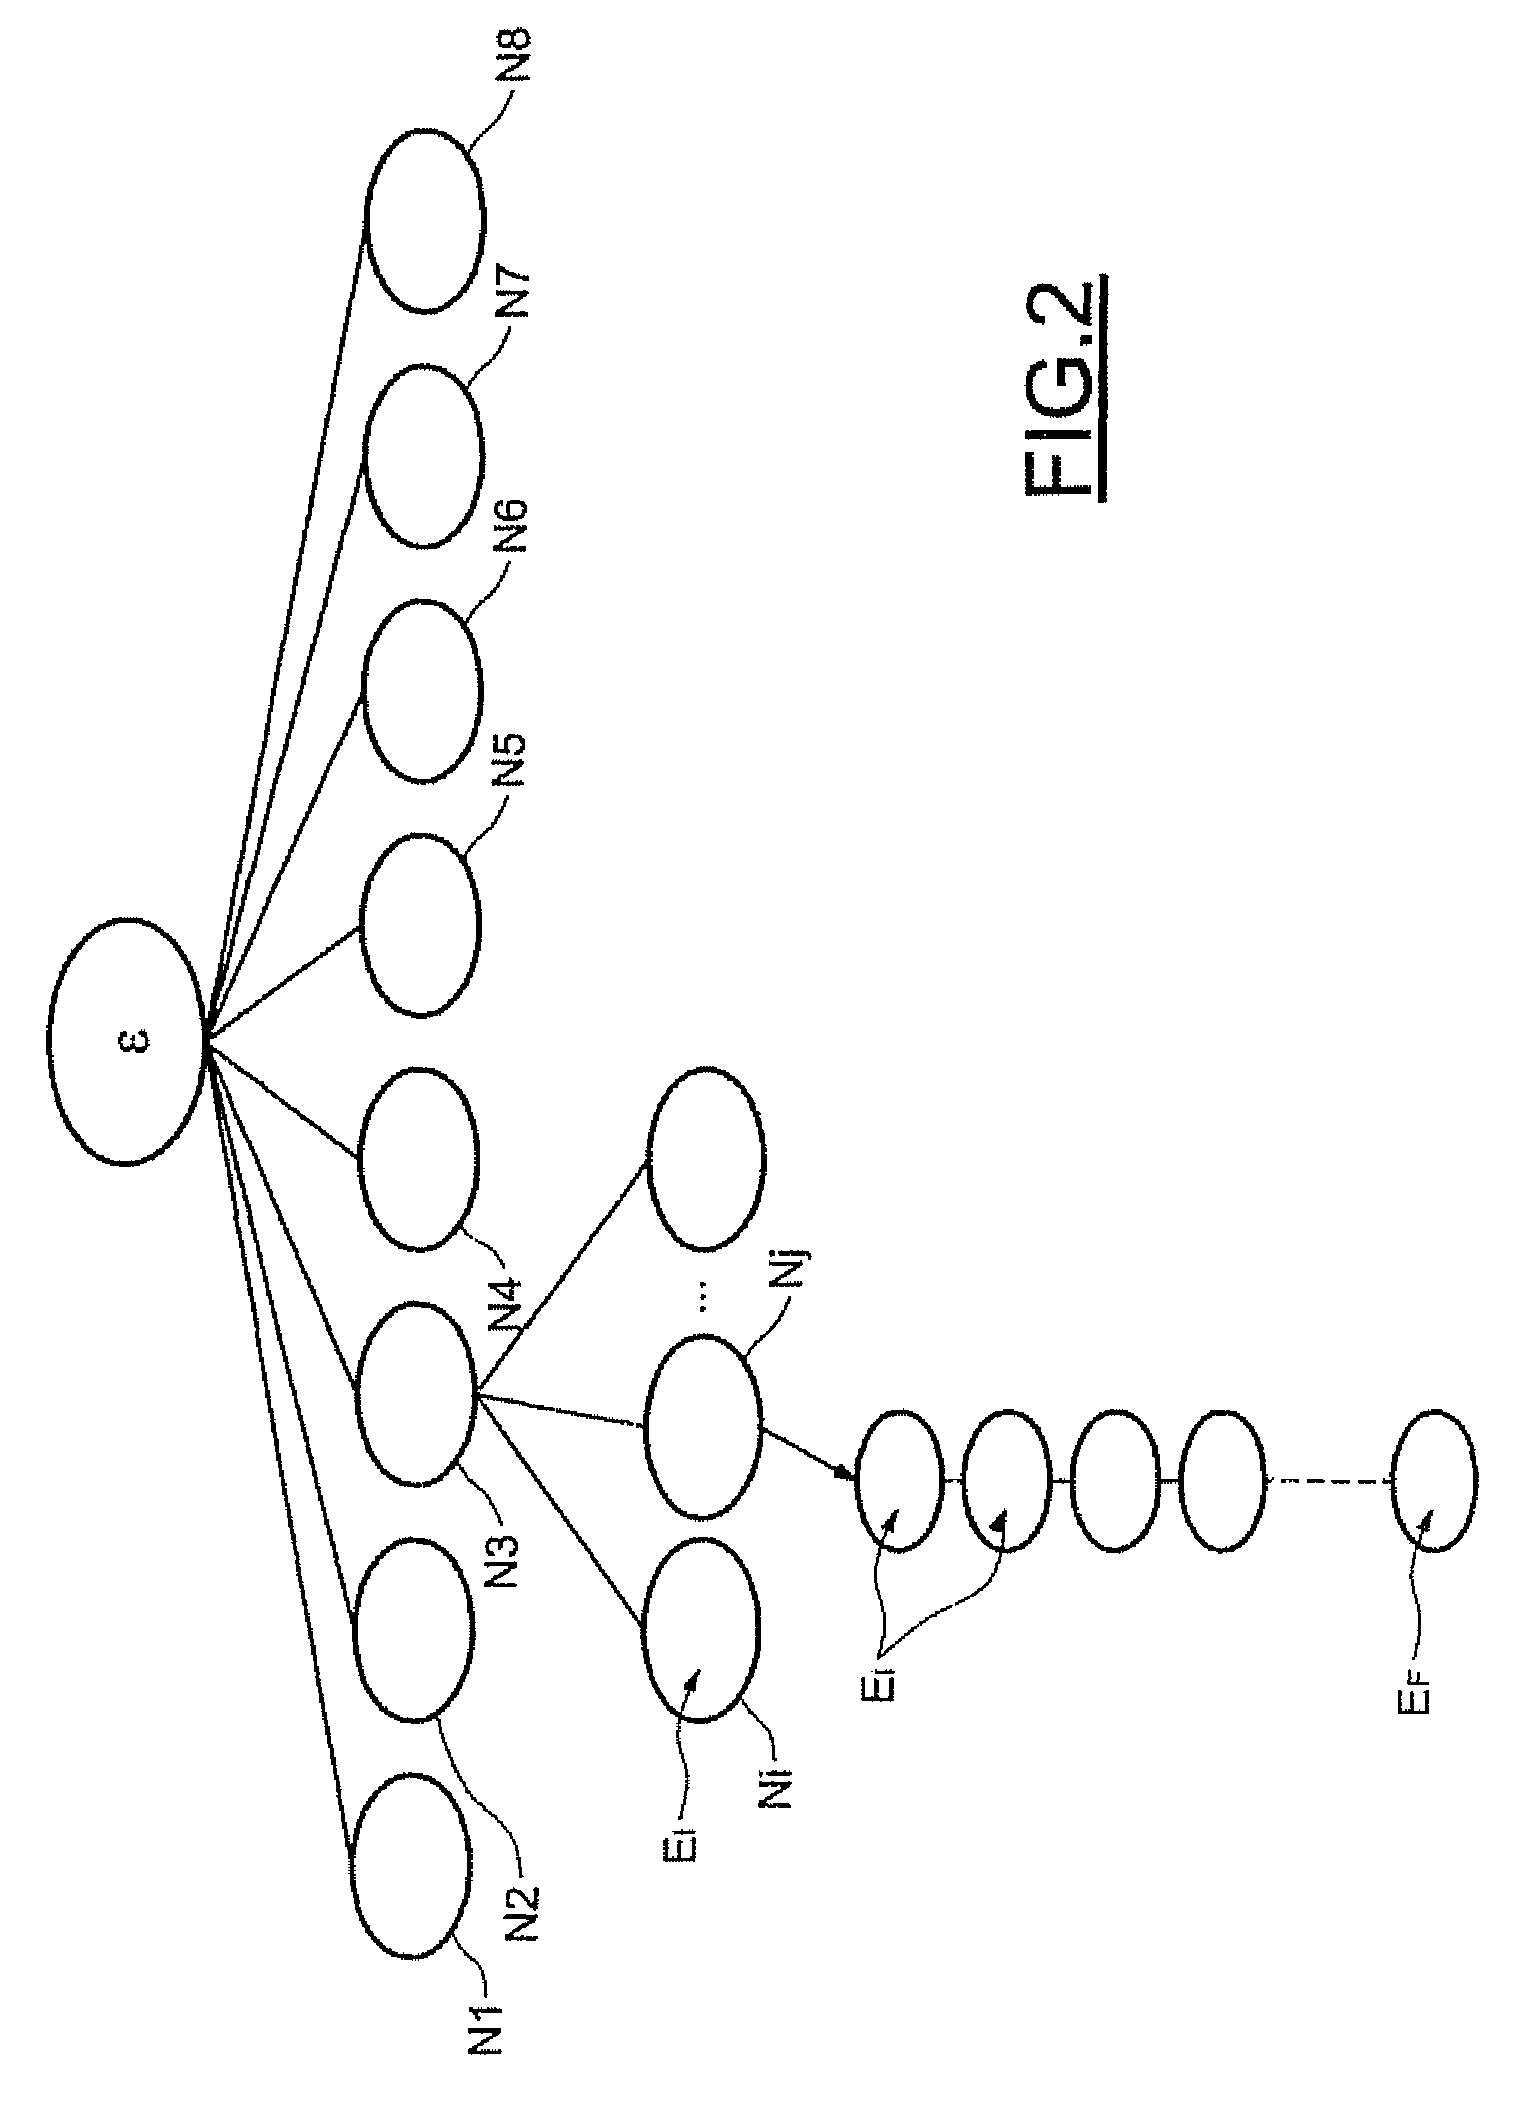 Memory circuit for Aho-corasick type character recognition automaton and method of storing data in such a circuit